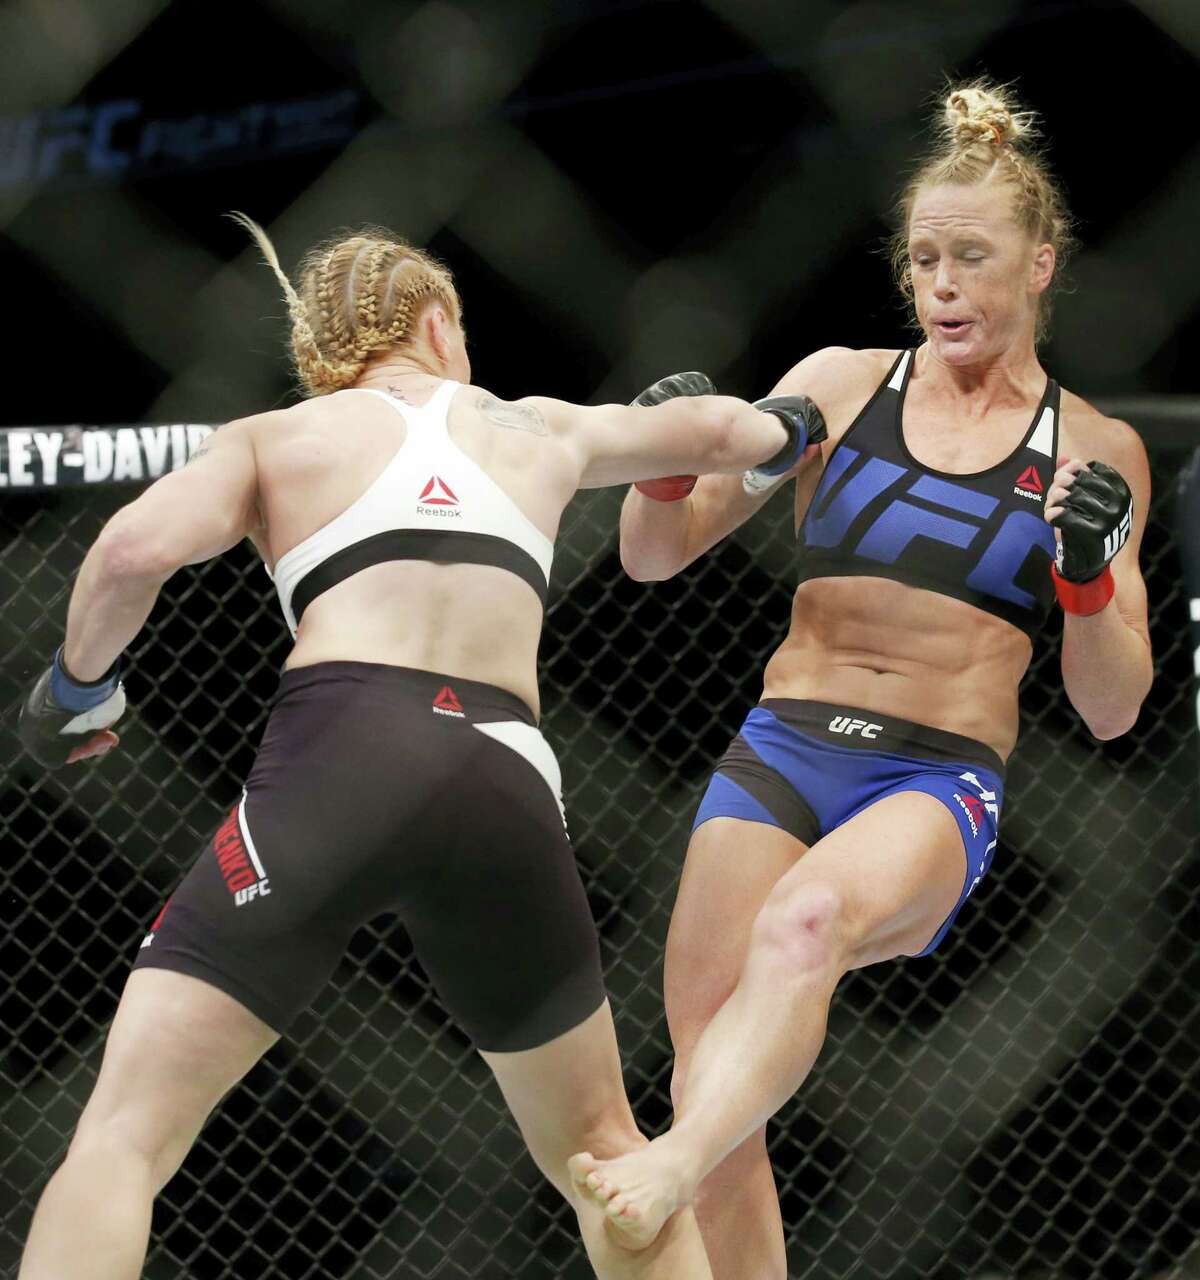 Holly Holm, right, tries to avoid a punch from Valentina Shevchenko during women’s bantamweight mixed martial arts bout in Chicago on Saturday.